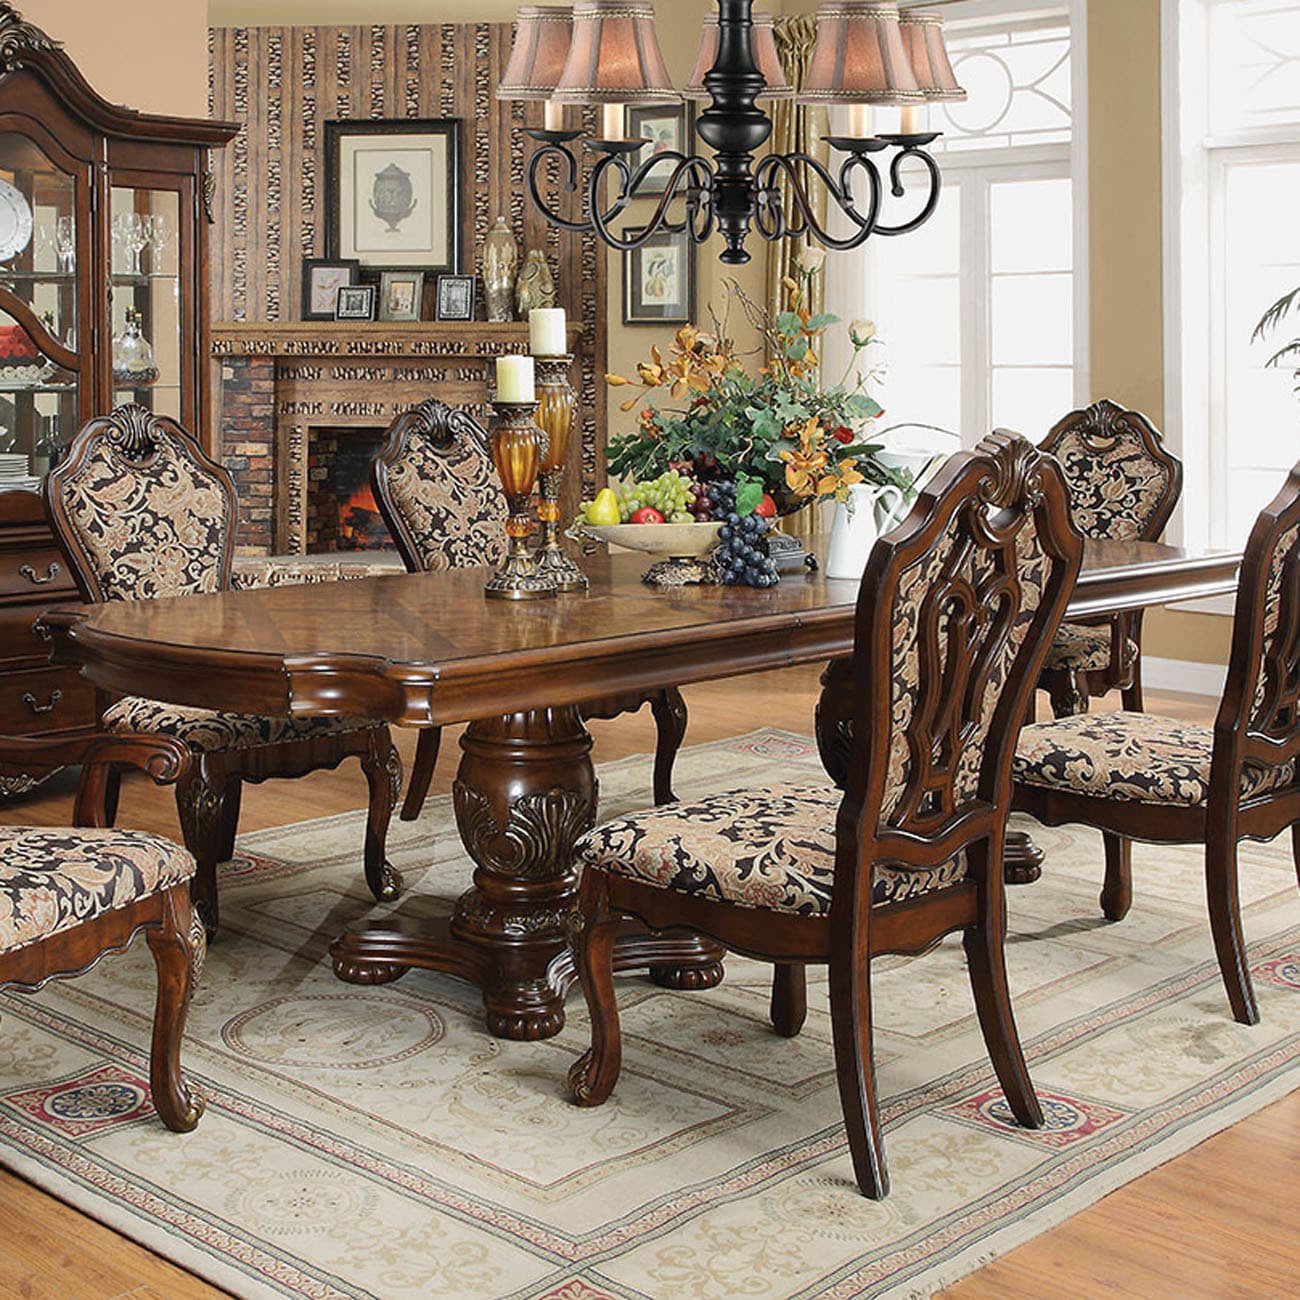 Furniture of America Lic Traditional Cherry 120-inch Dining Table